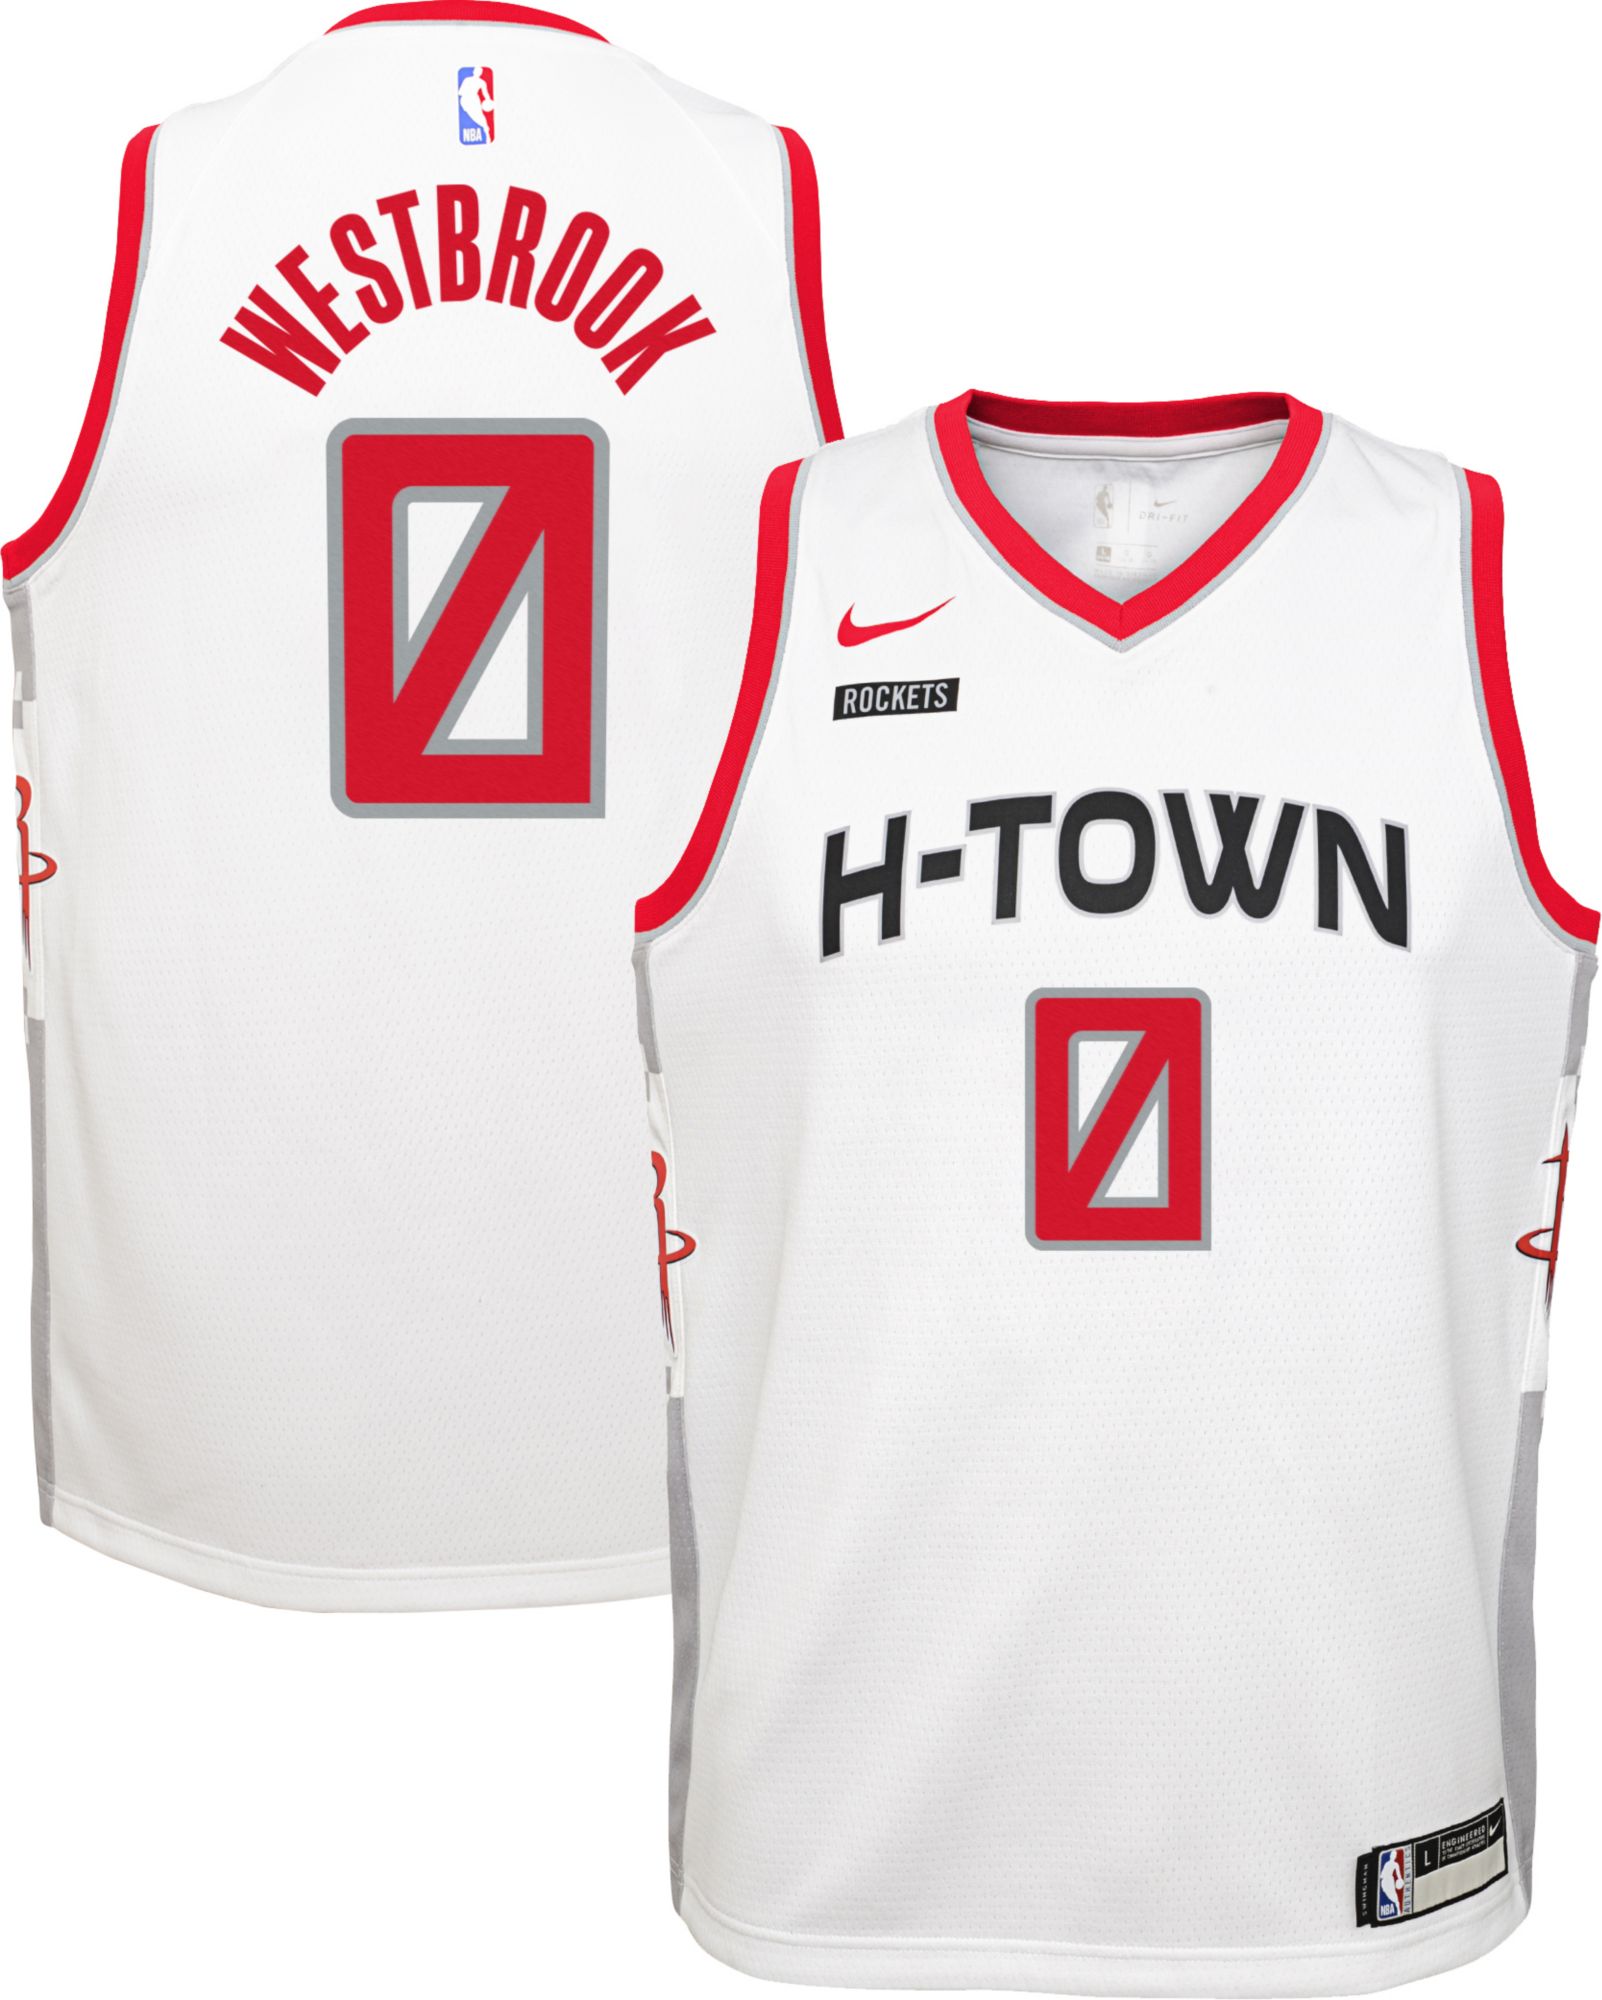 russell westbrook jersey canada